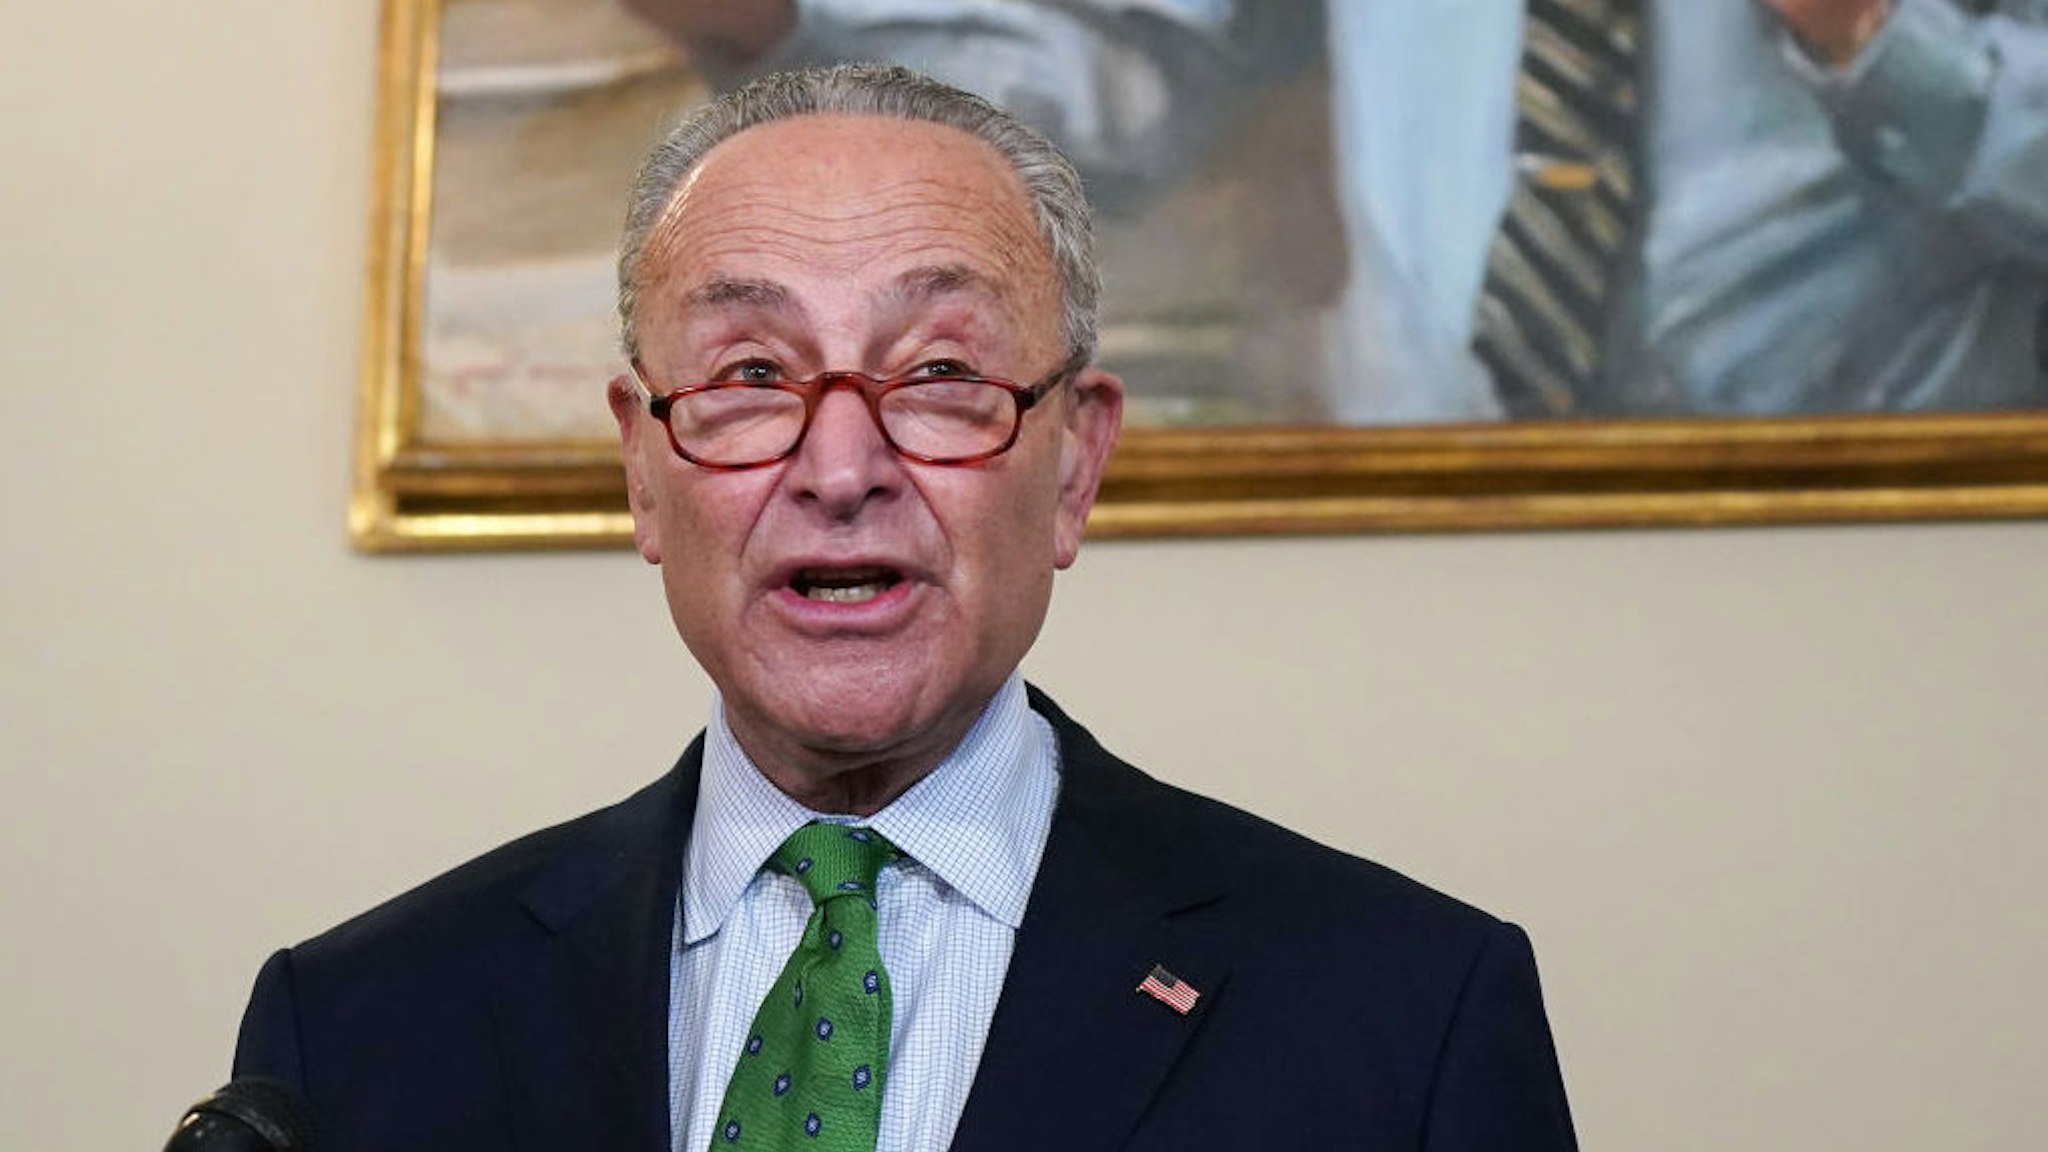 WASHINGTON, DC - SEPTEMBER 10: Senator Chuck Schumer speaks at the Back the Thrive Agenda press conference at the Longworth Office Building on September 10, 2020 in Washington, DC.